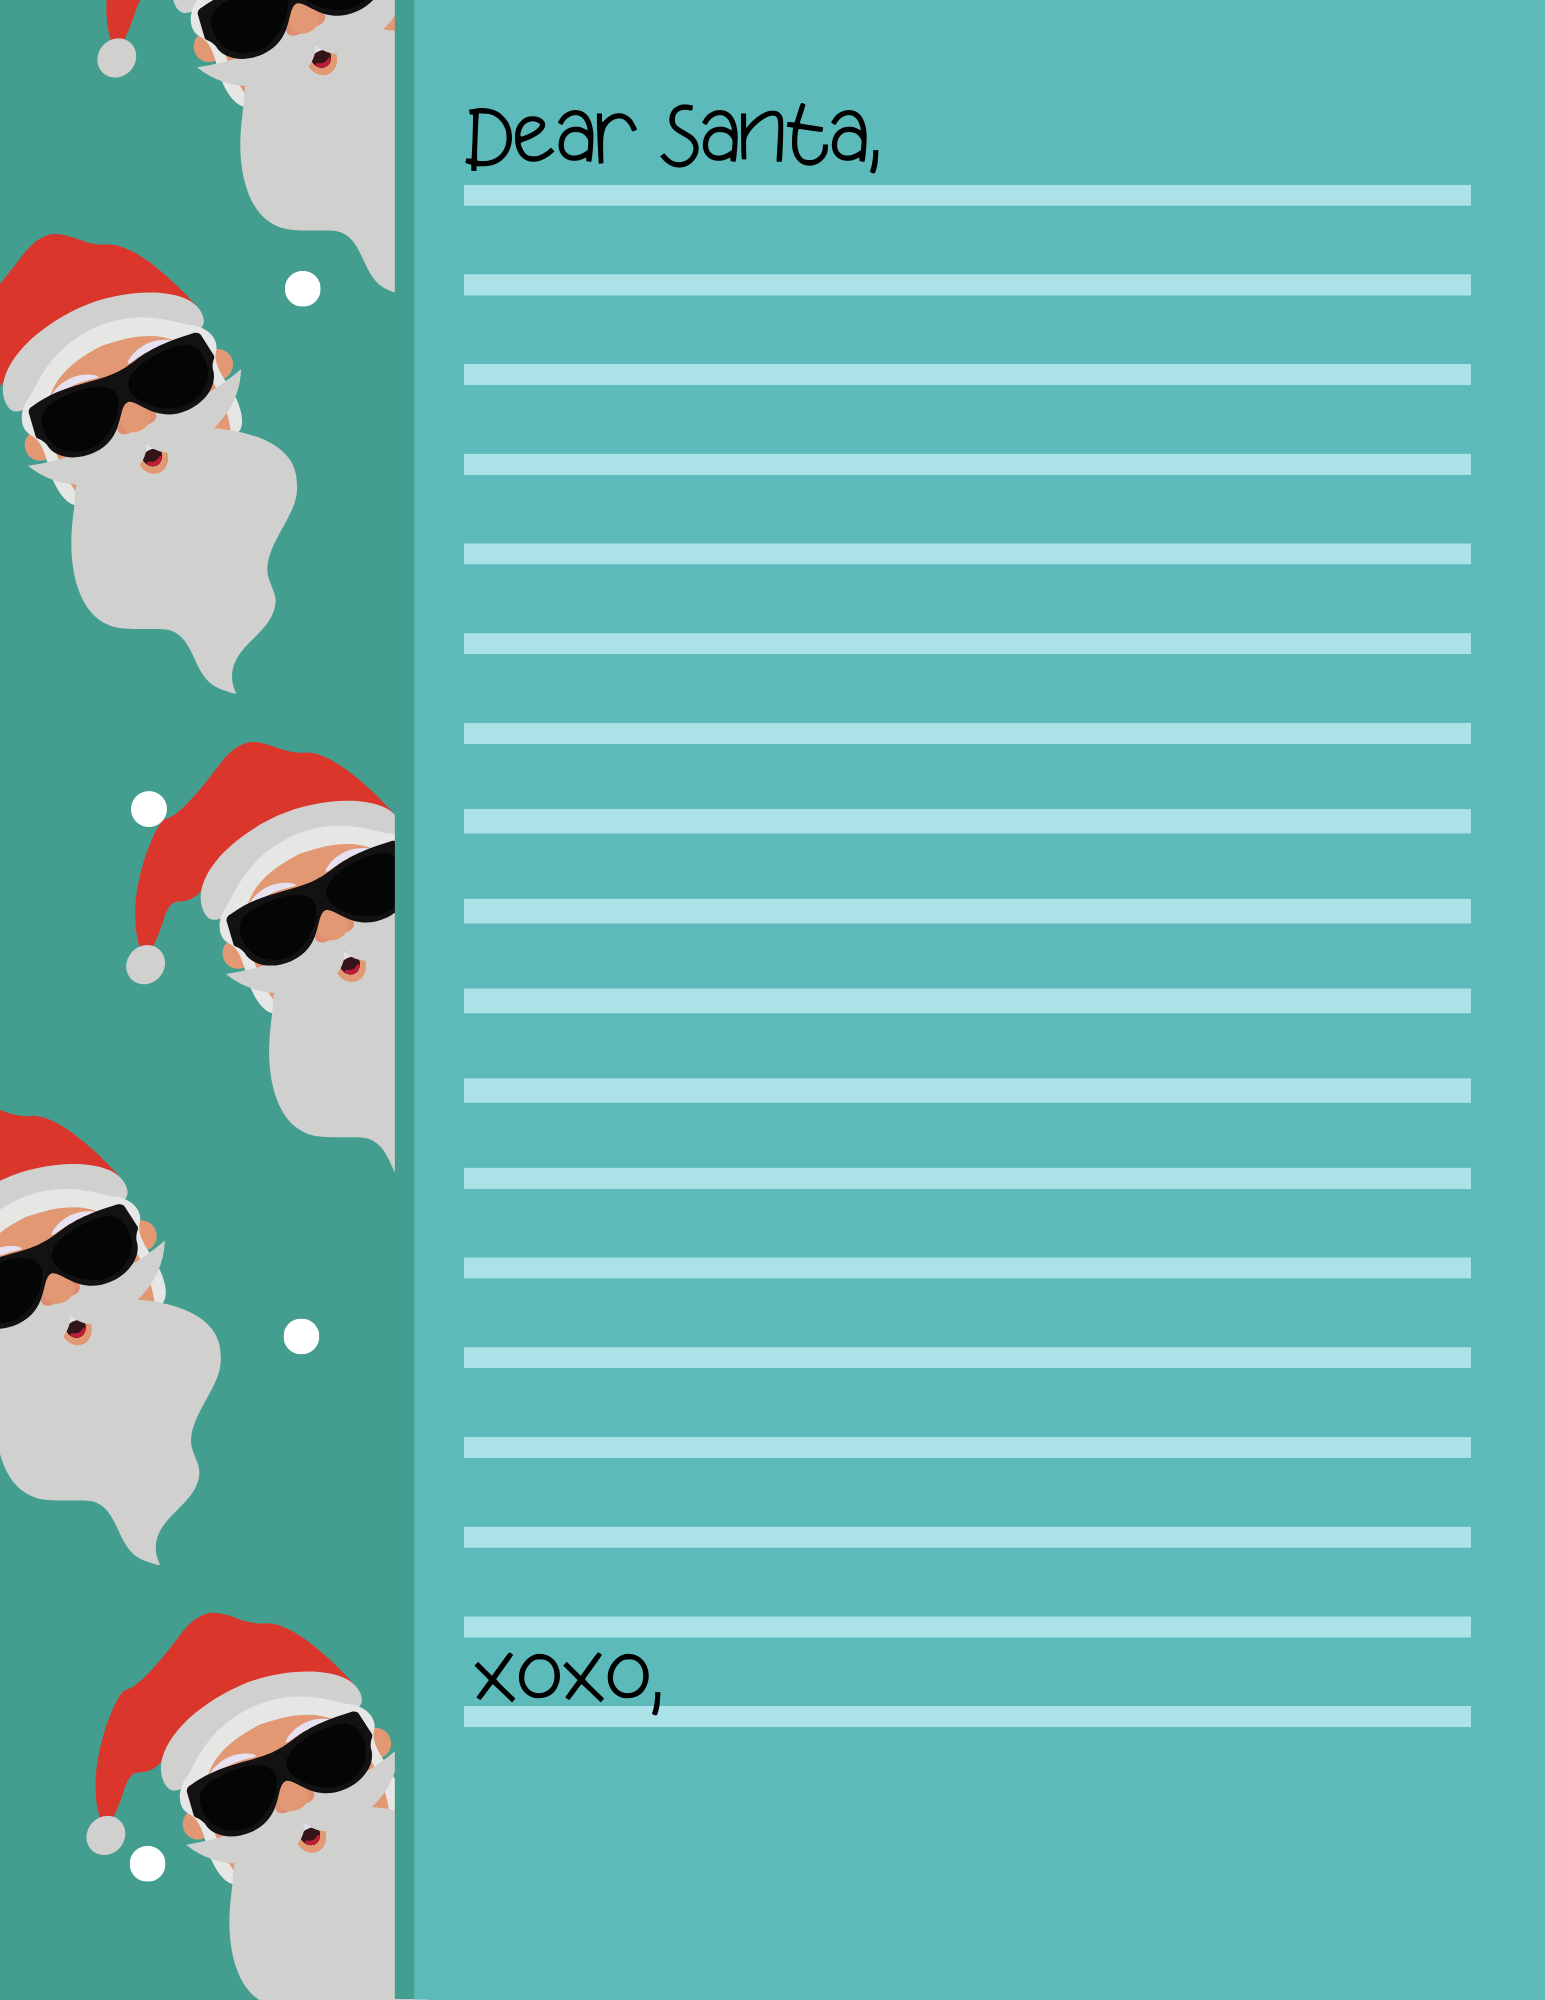 This printable featuring a sunglasses santa is as sassy as your little love